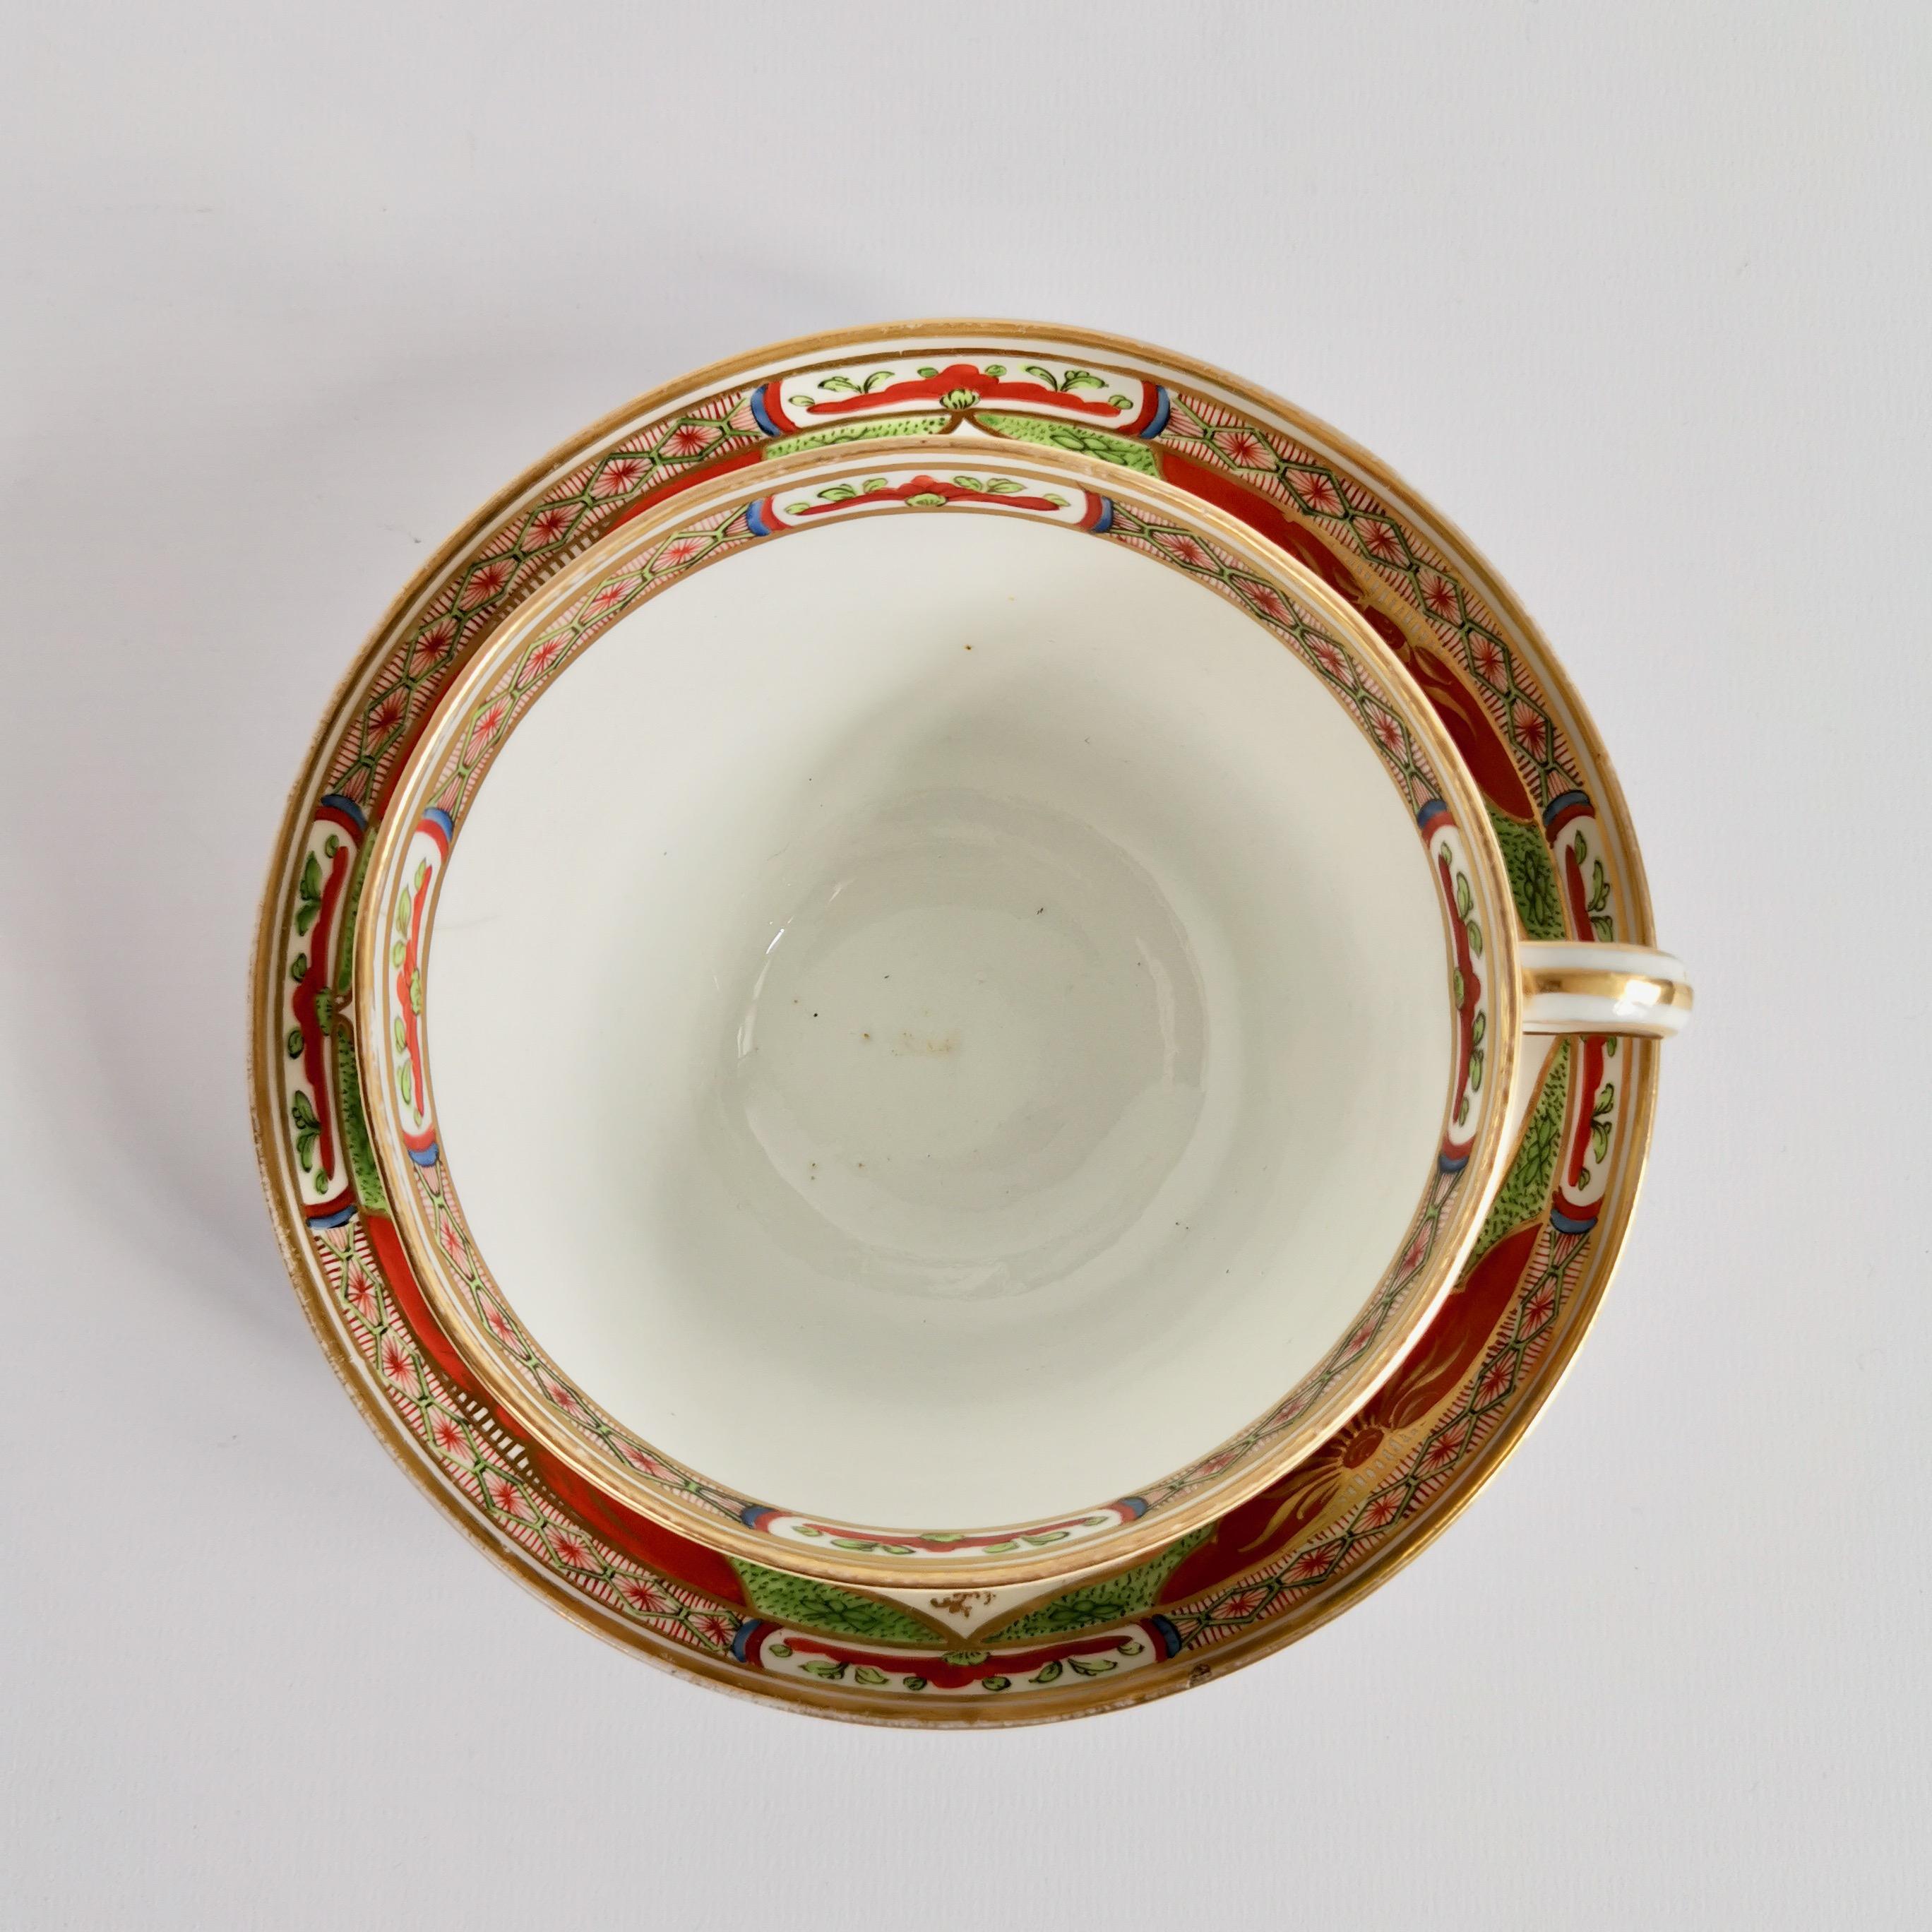 Porcelain Breakfast Cup Chamberlains Worcester, Dragons in Compartments 7